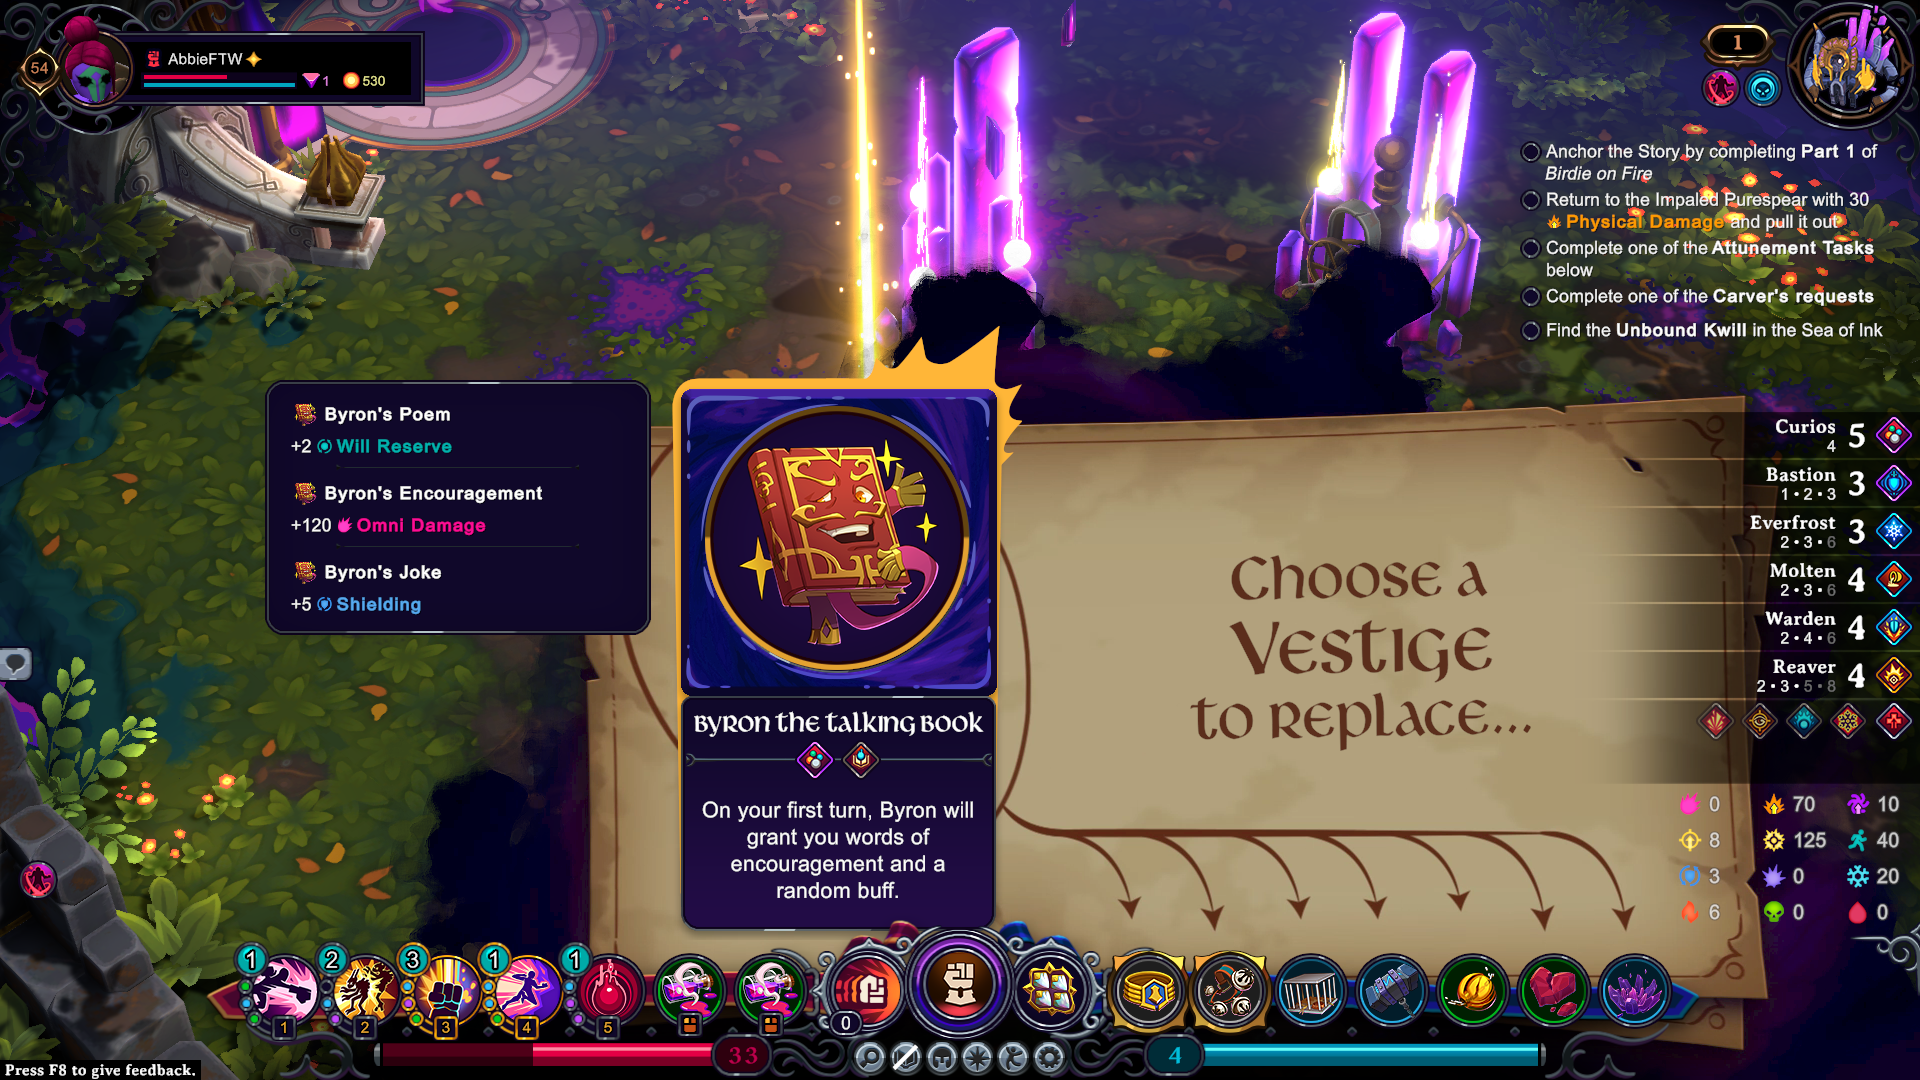 A screen asking the player to choose which vestige to replace with a new one in Inkbound.